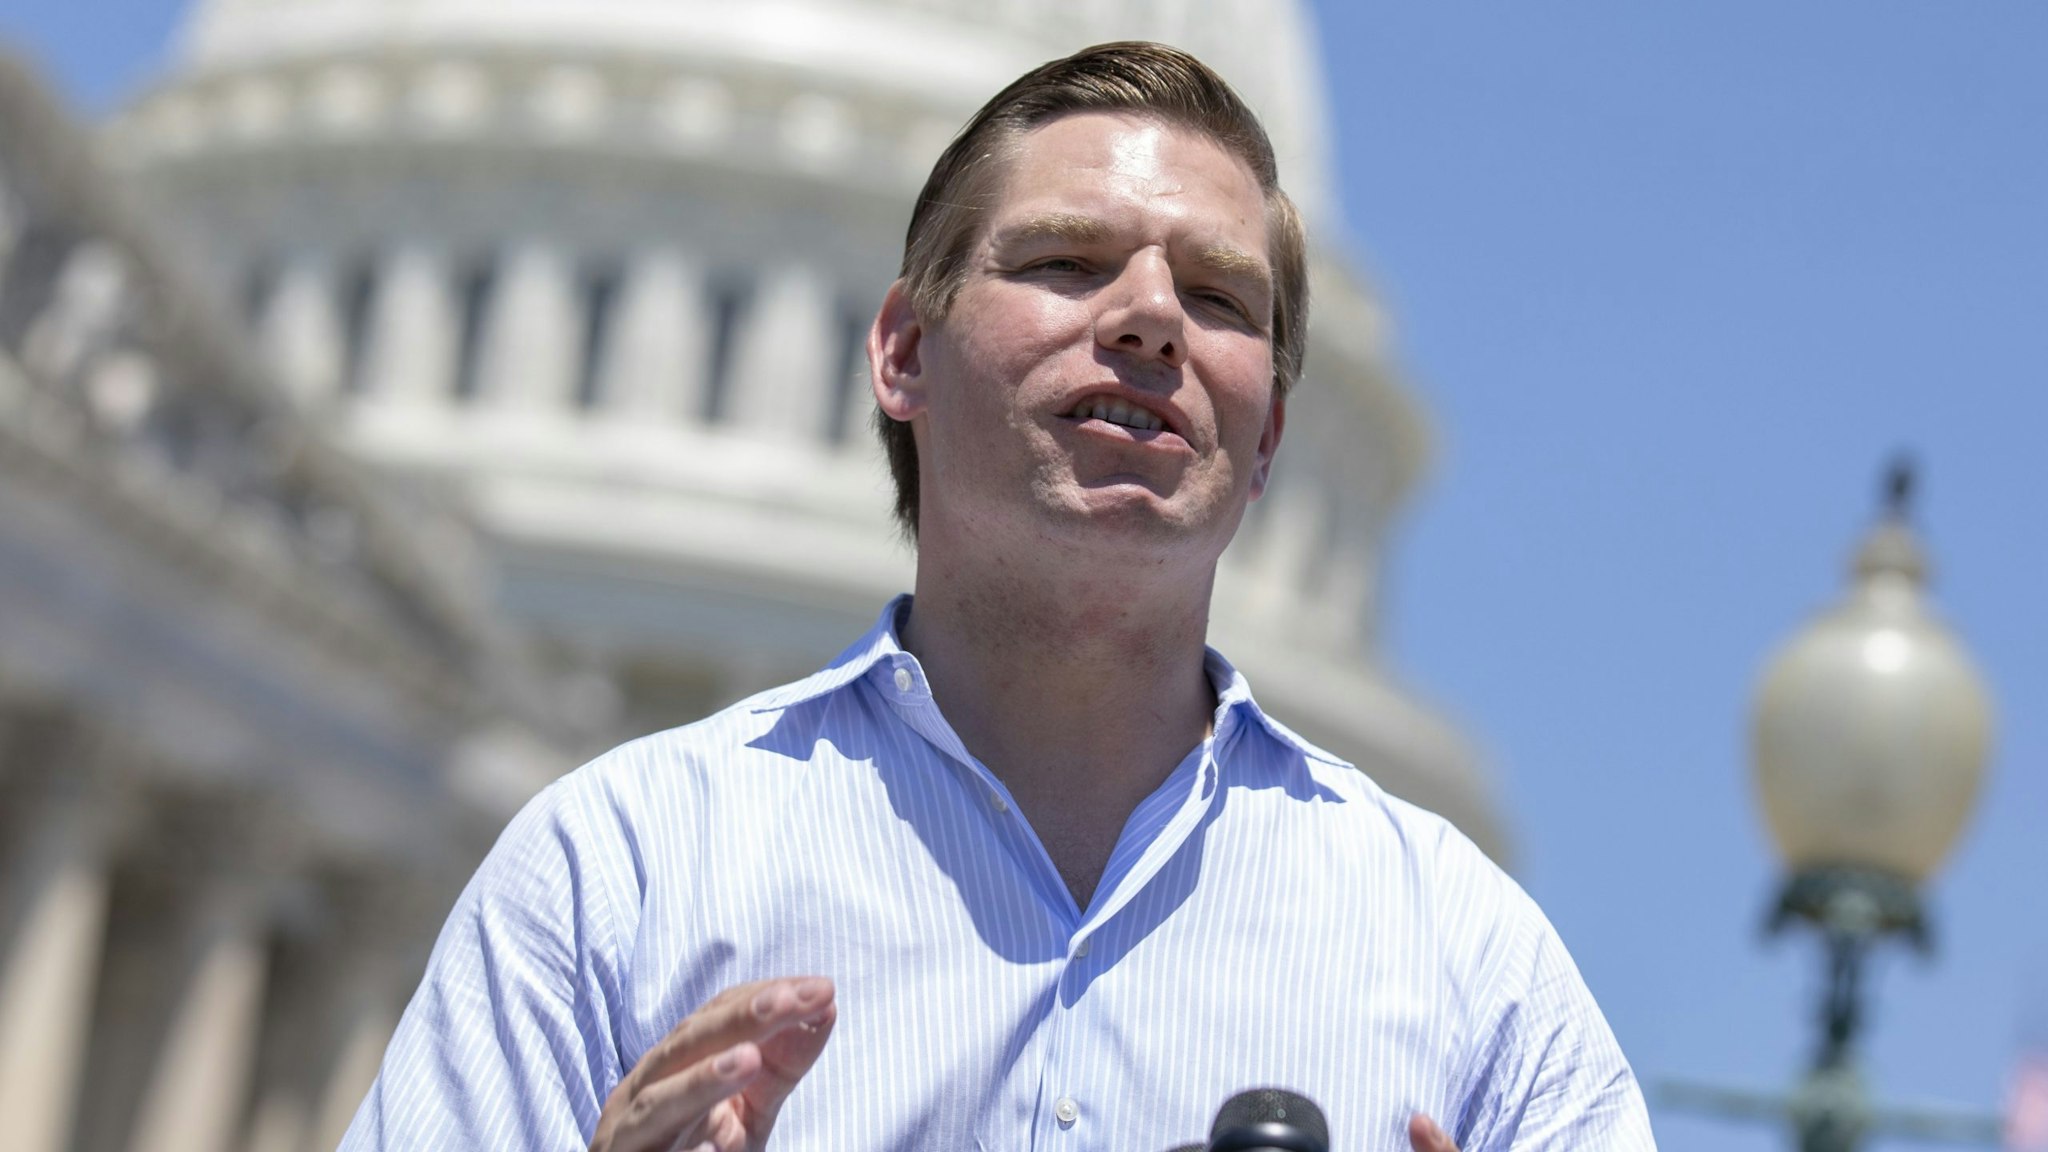 WASHINGTON, DC - JULY 10: Rep. Eric Swalwell (D-CA) speaks during a news conference regarding the separation of immigrant children at the U.S. Capitol on July 10, 2018 in Washington, DC. A court order issued June 26 set a deadline of July 10 to reunite the roughly 100 young children with their parents.